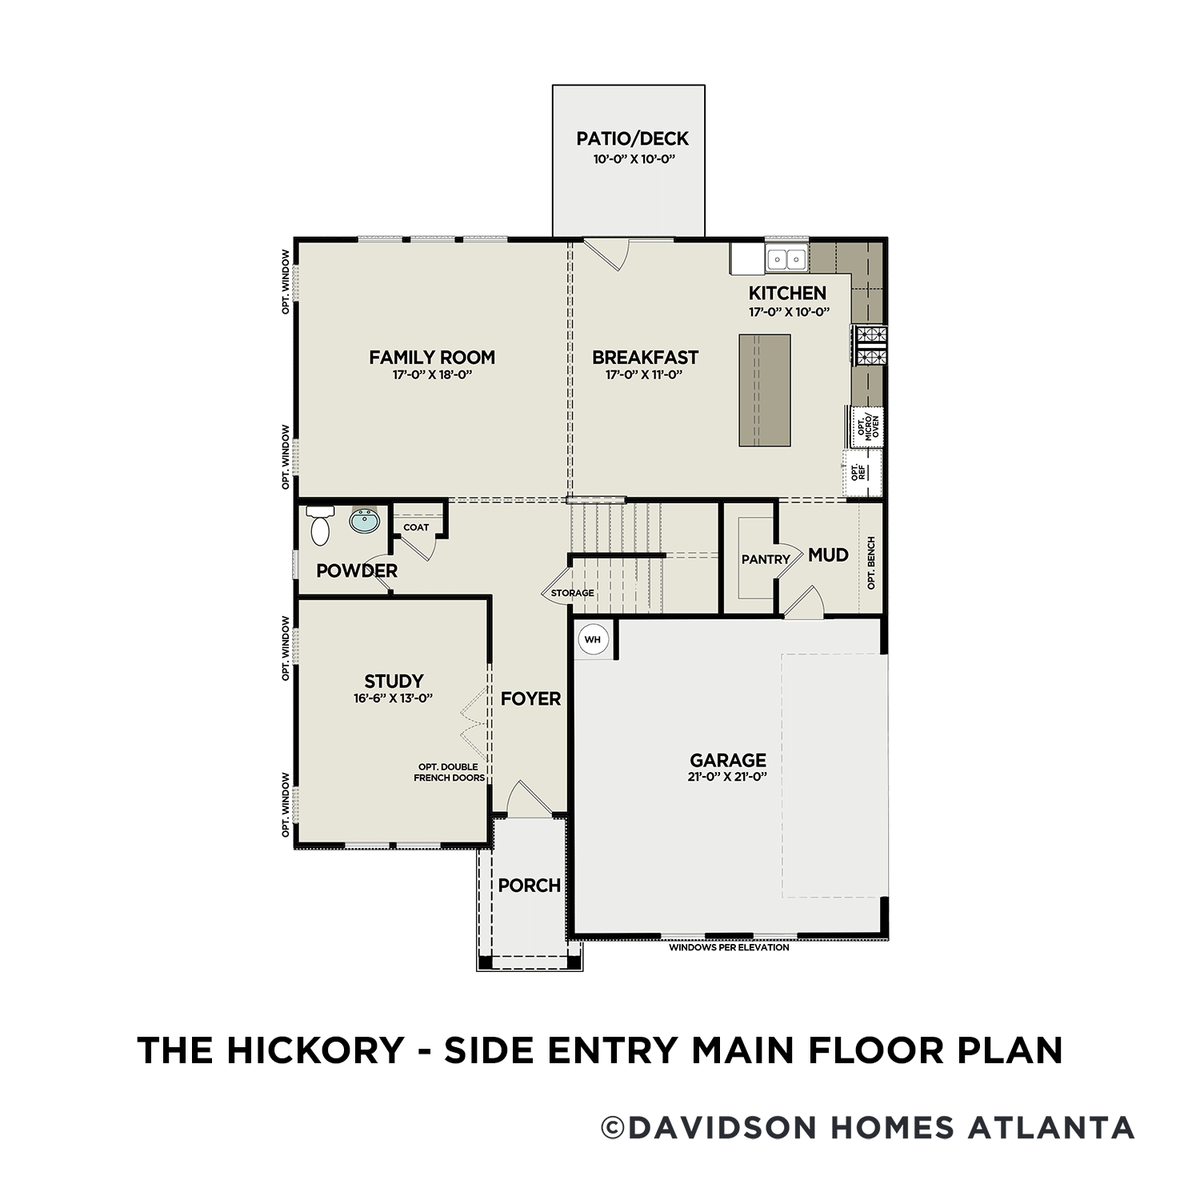 1 - The Hickory B – Side Entry buildable floor plan layout in Davidson Homes' Everleigh community.